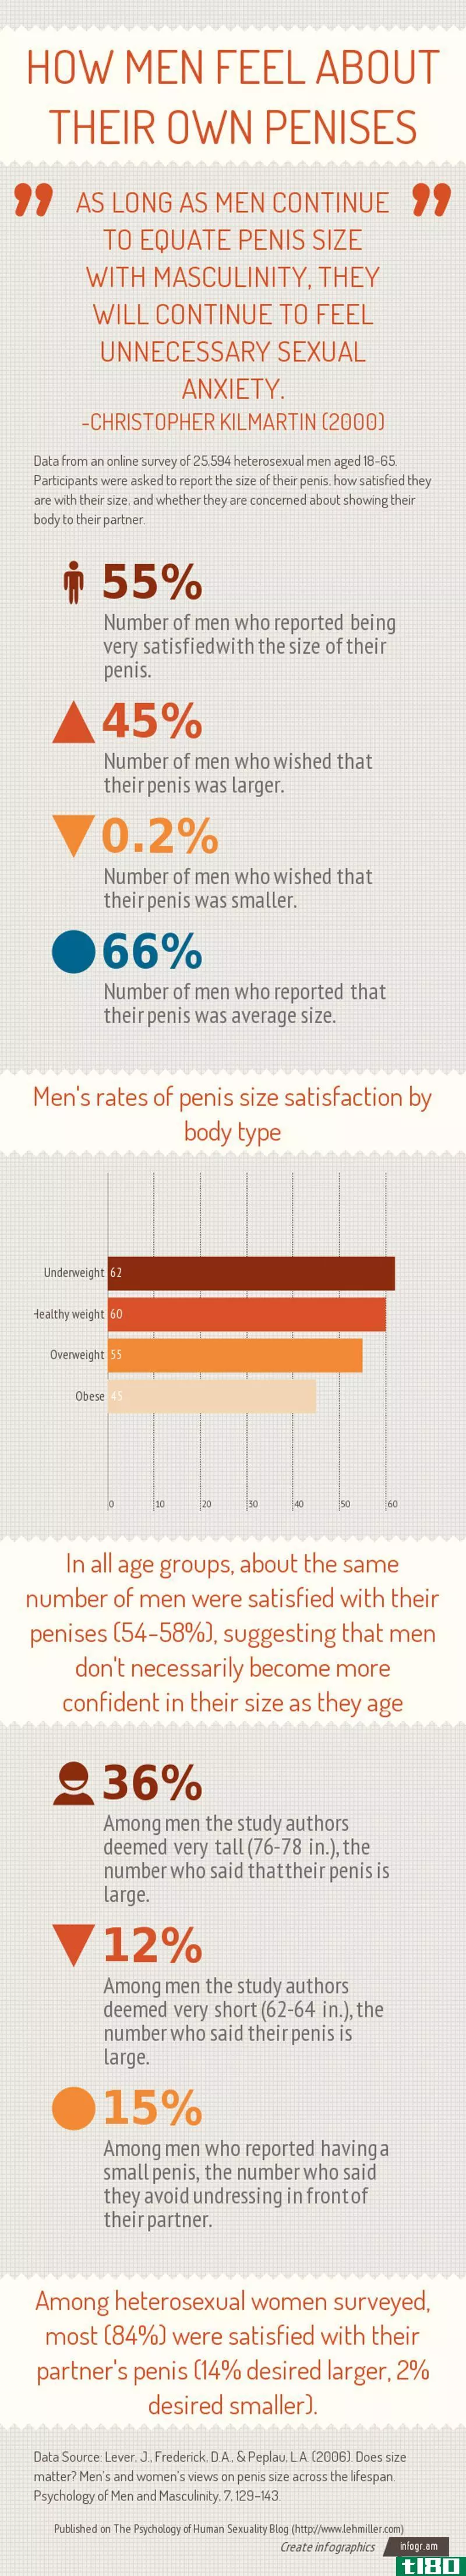 Illustration for article titled Men Who Weigh Less Like Their Penises More